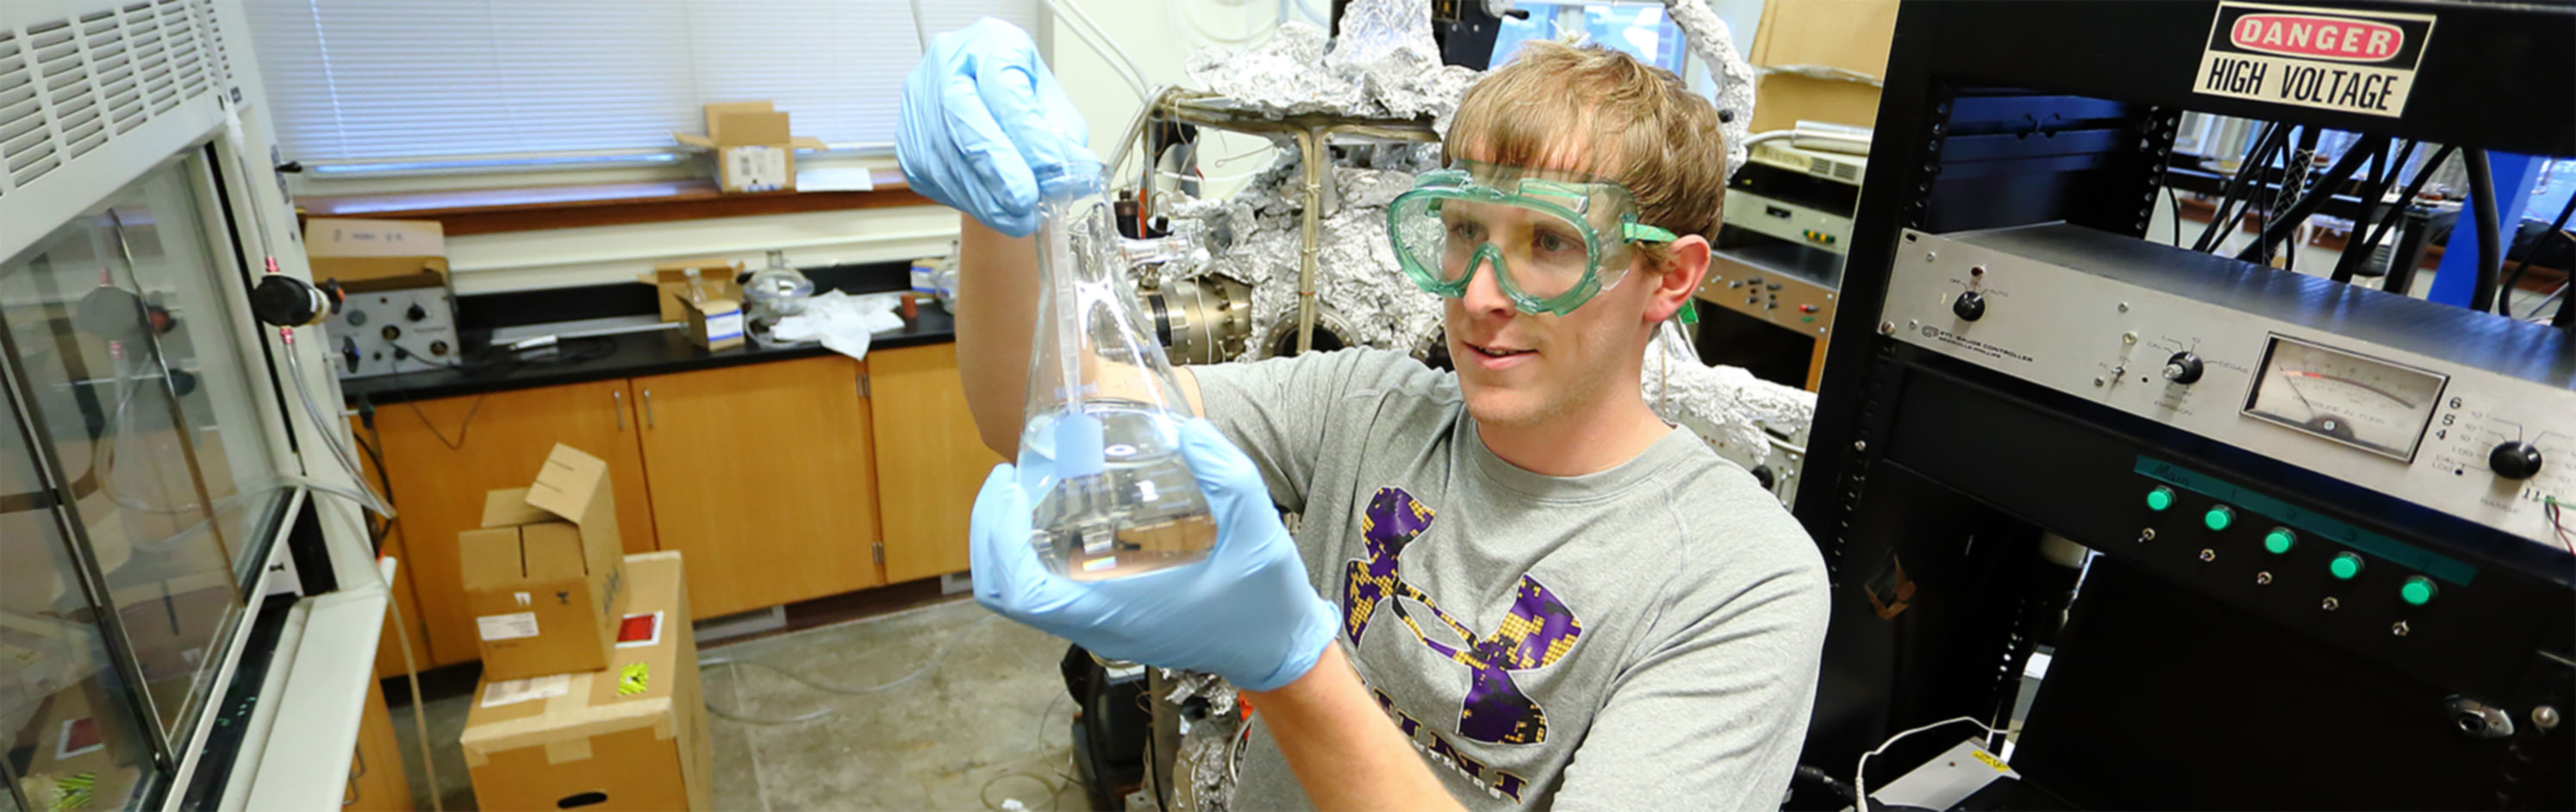 Student with safety glasses on mixing some chemicals.